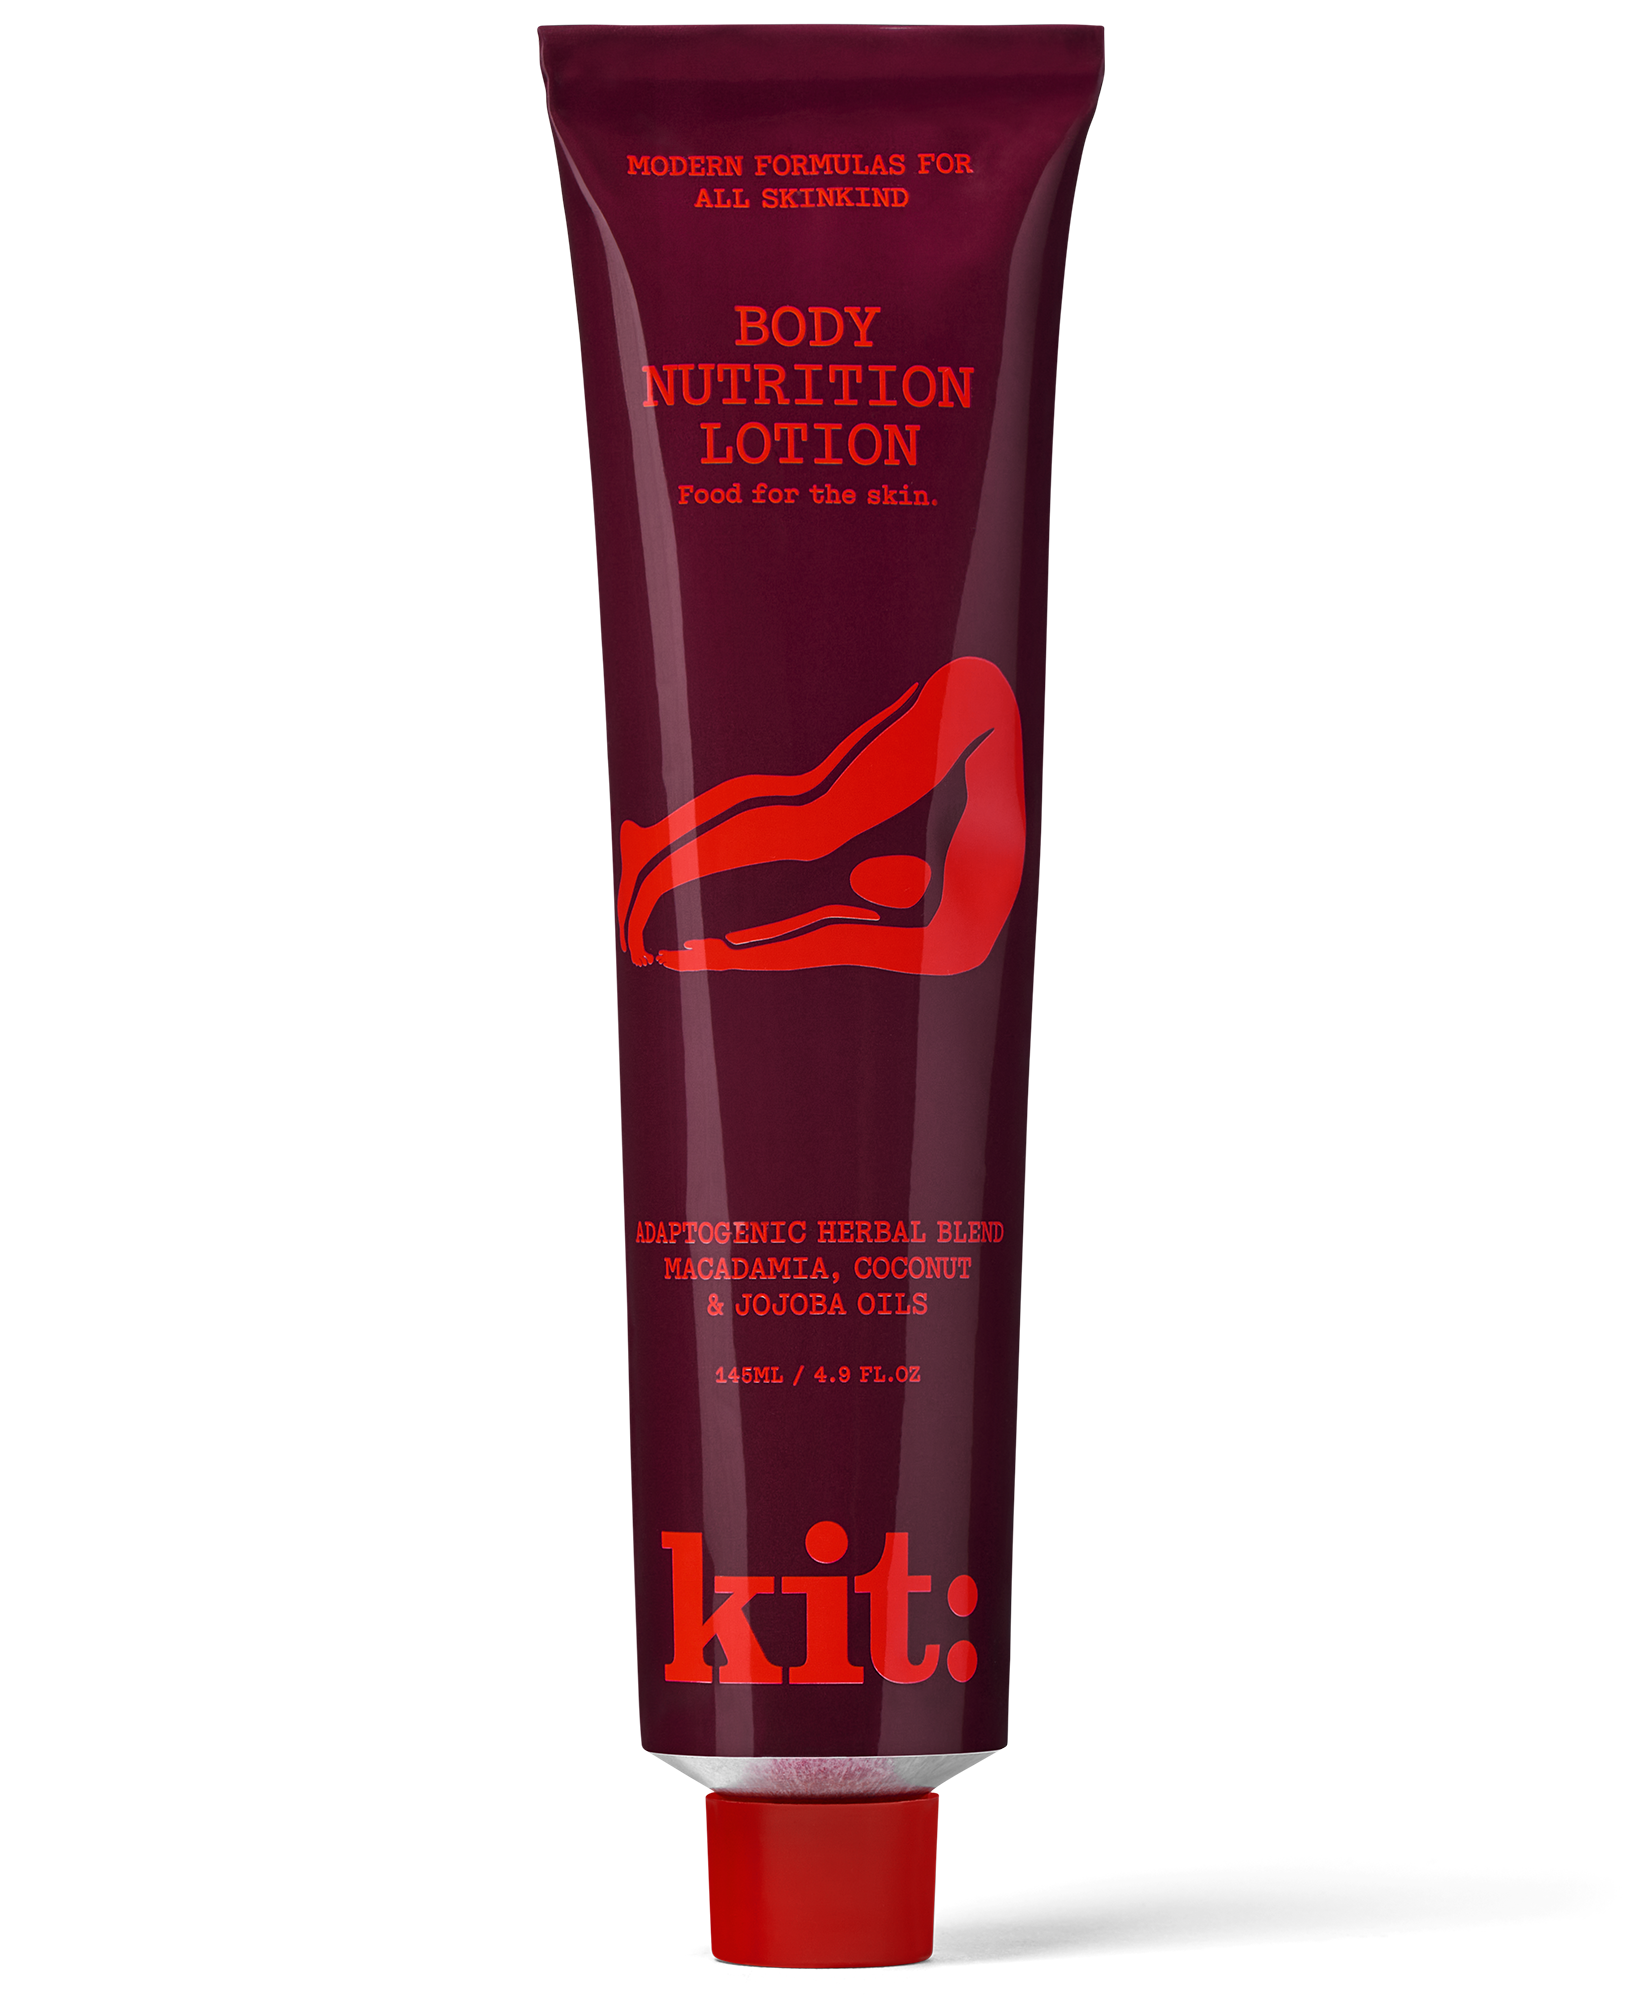 Body Nutrition Lotion